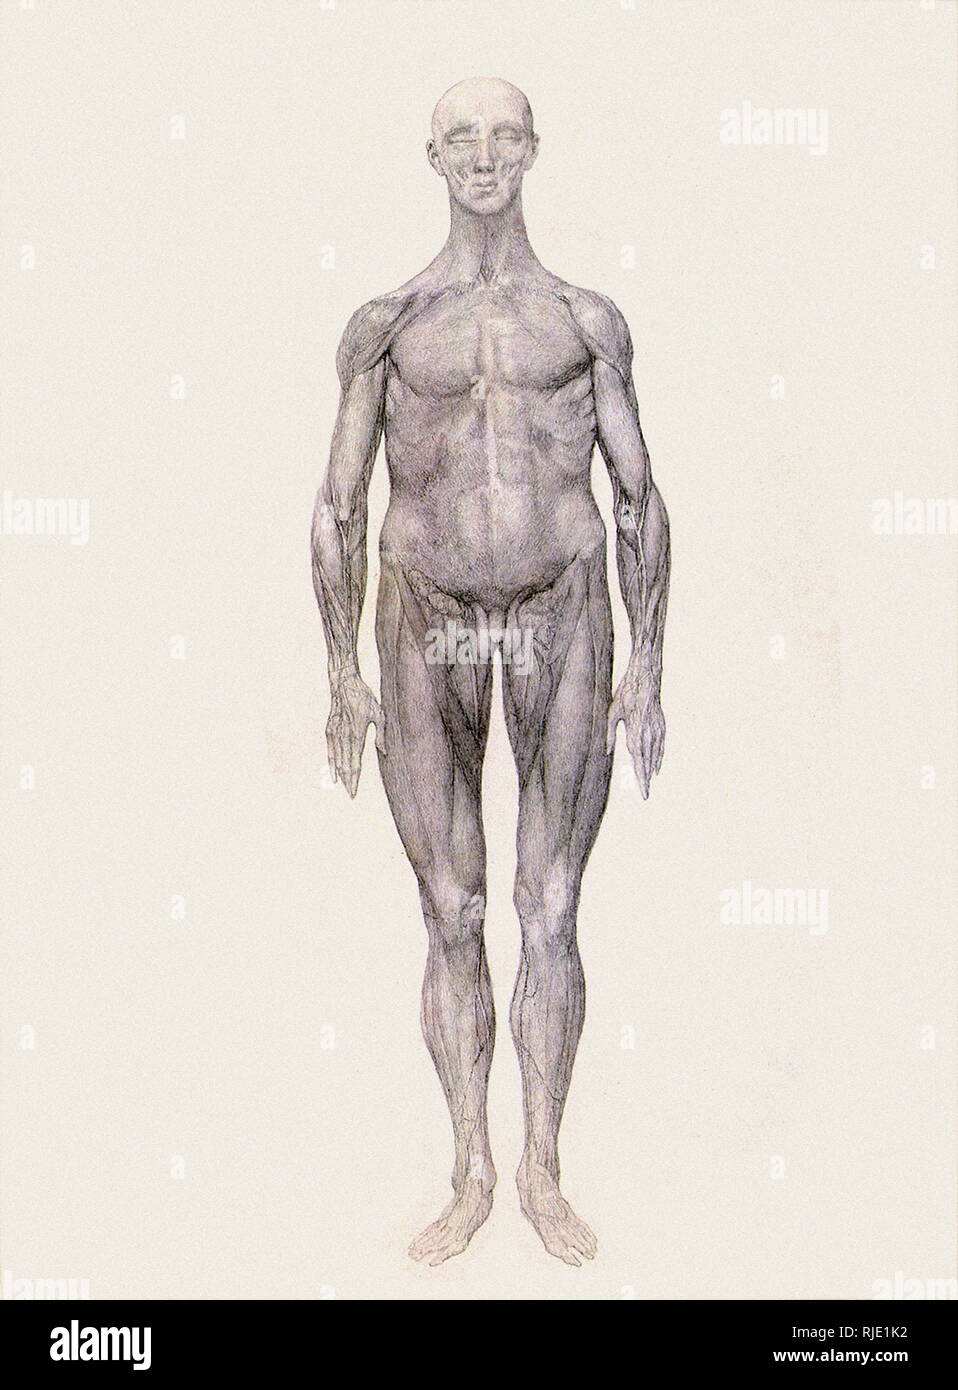 Human Being, Anterior View. Stock Photo